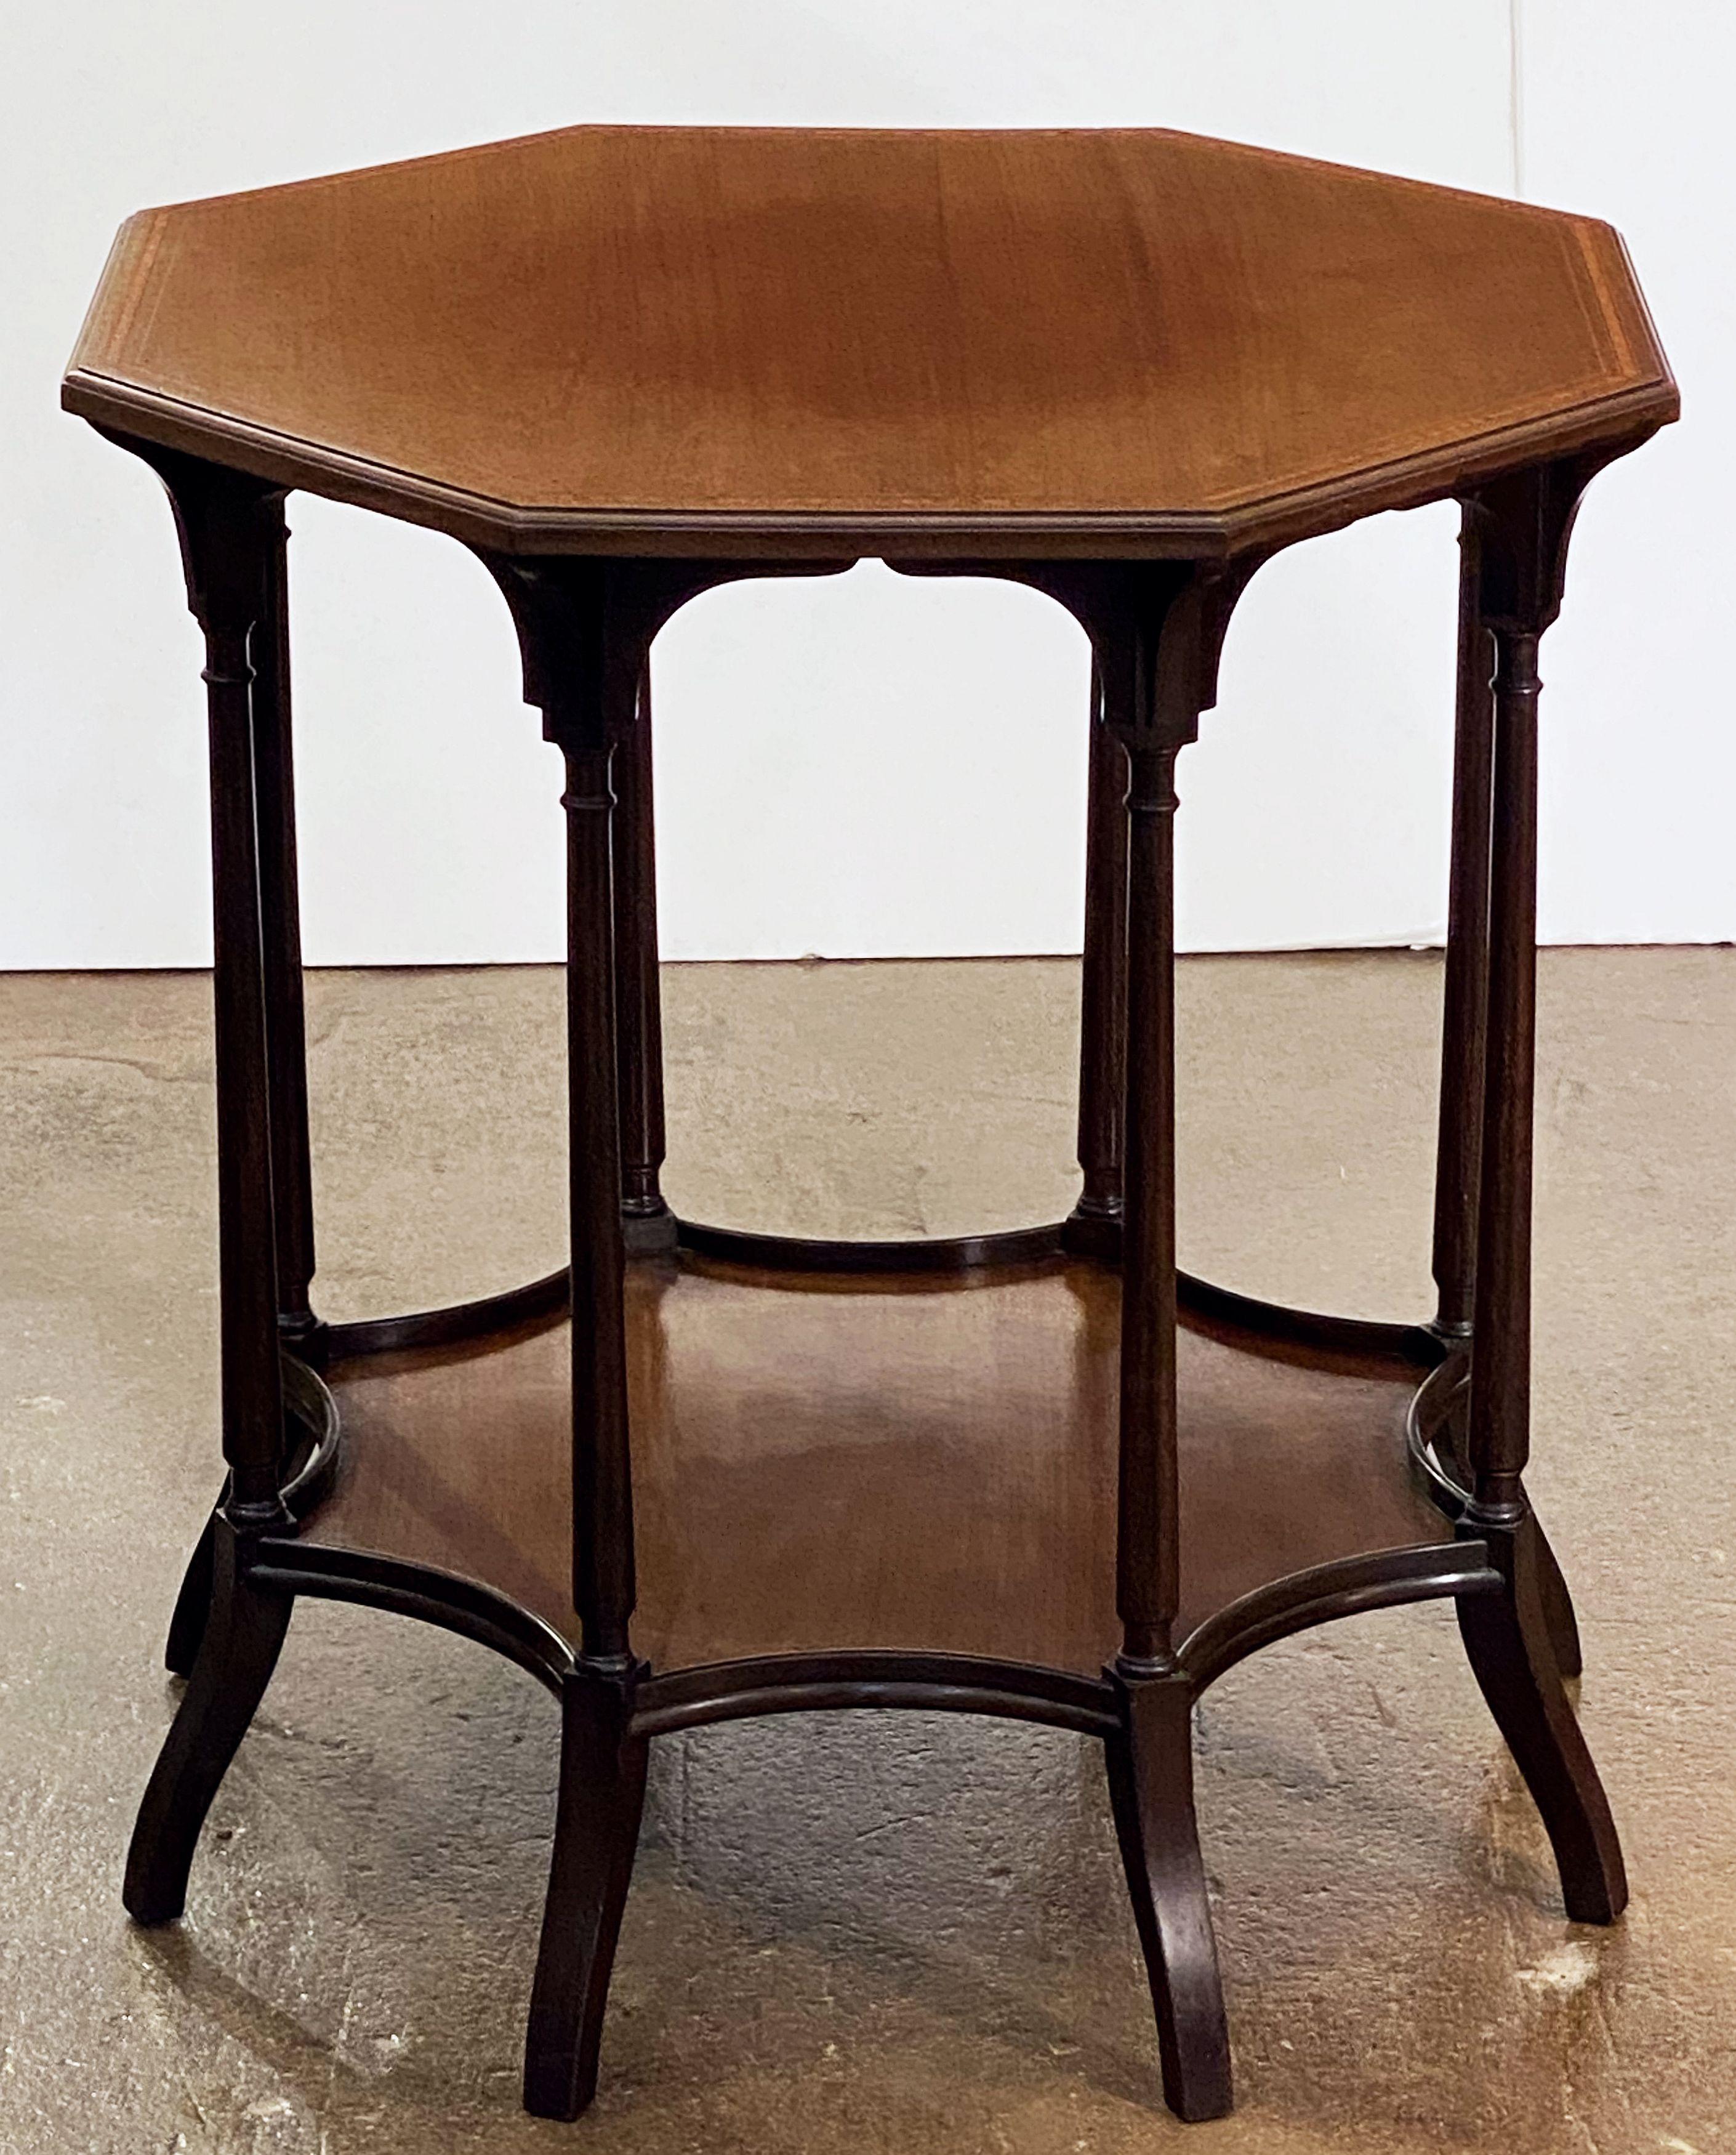 A fine English spider leg occasional table of mahogany from the Edwardian Era, in the manner of Morris & Co., featuring an octagonal crossbanded top, eight stylishly turned legs and storage shelf at bottom.
 
 